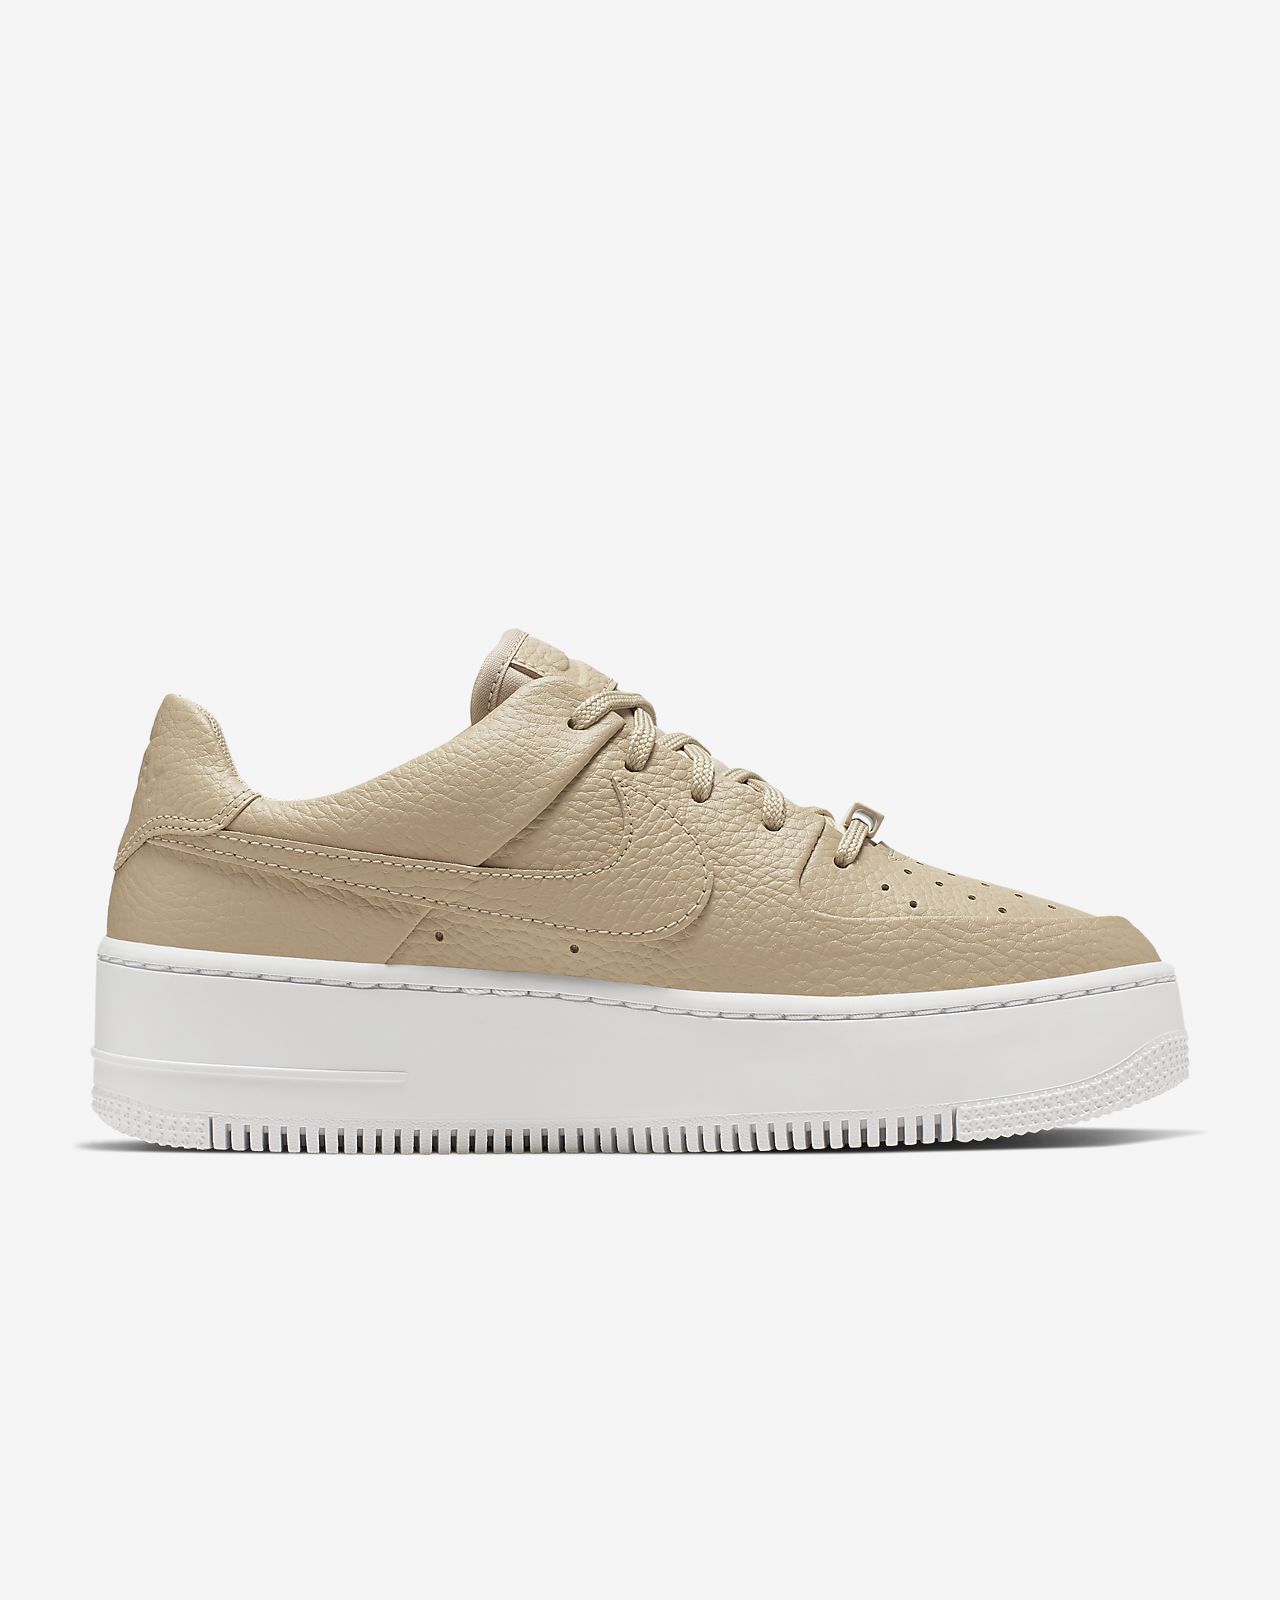 mujer nike air force 1 suede tan hot a54e2 3cefb